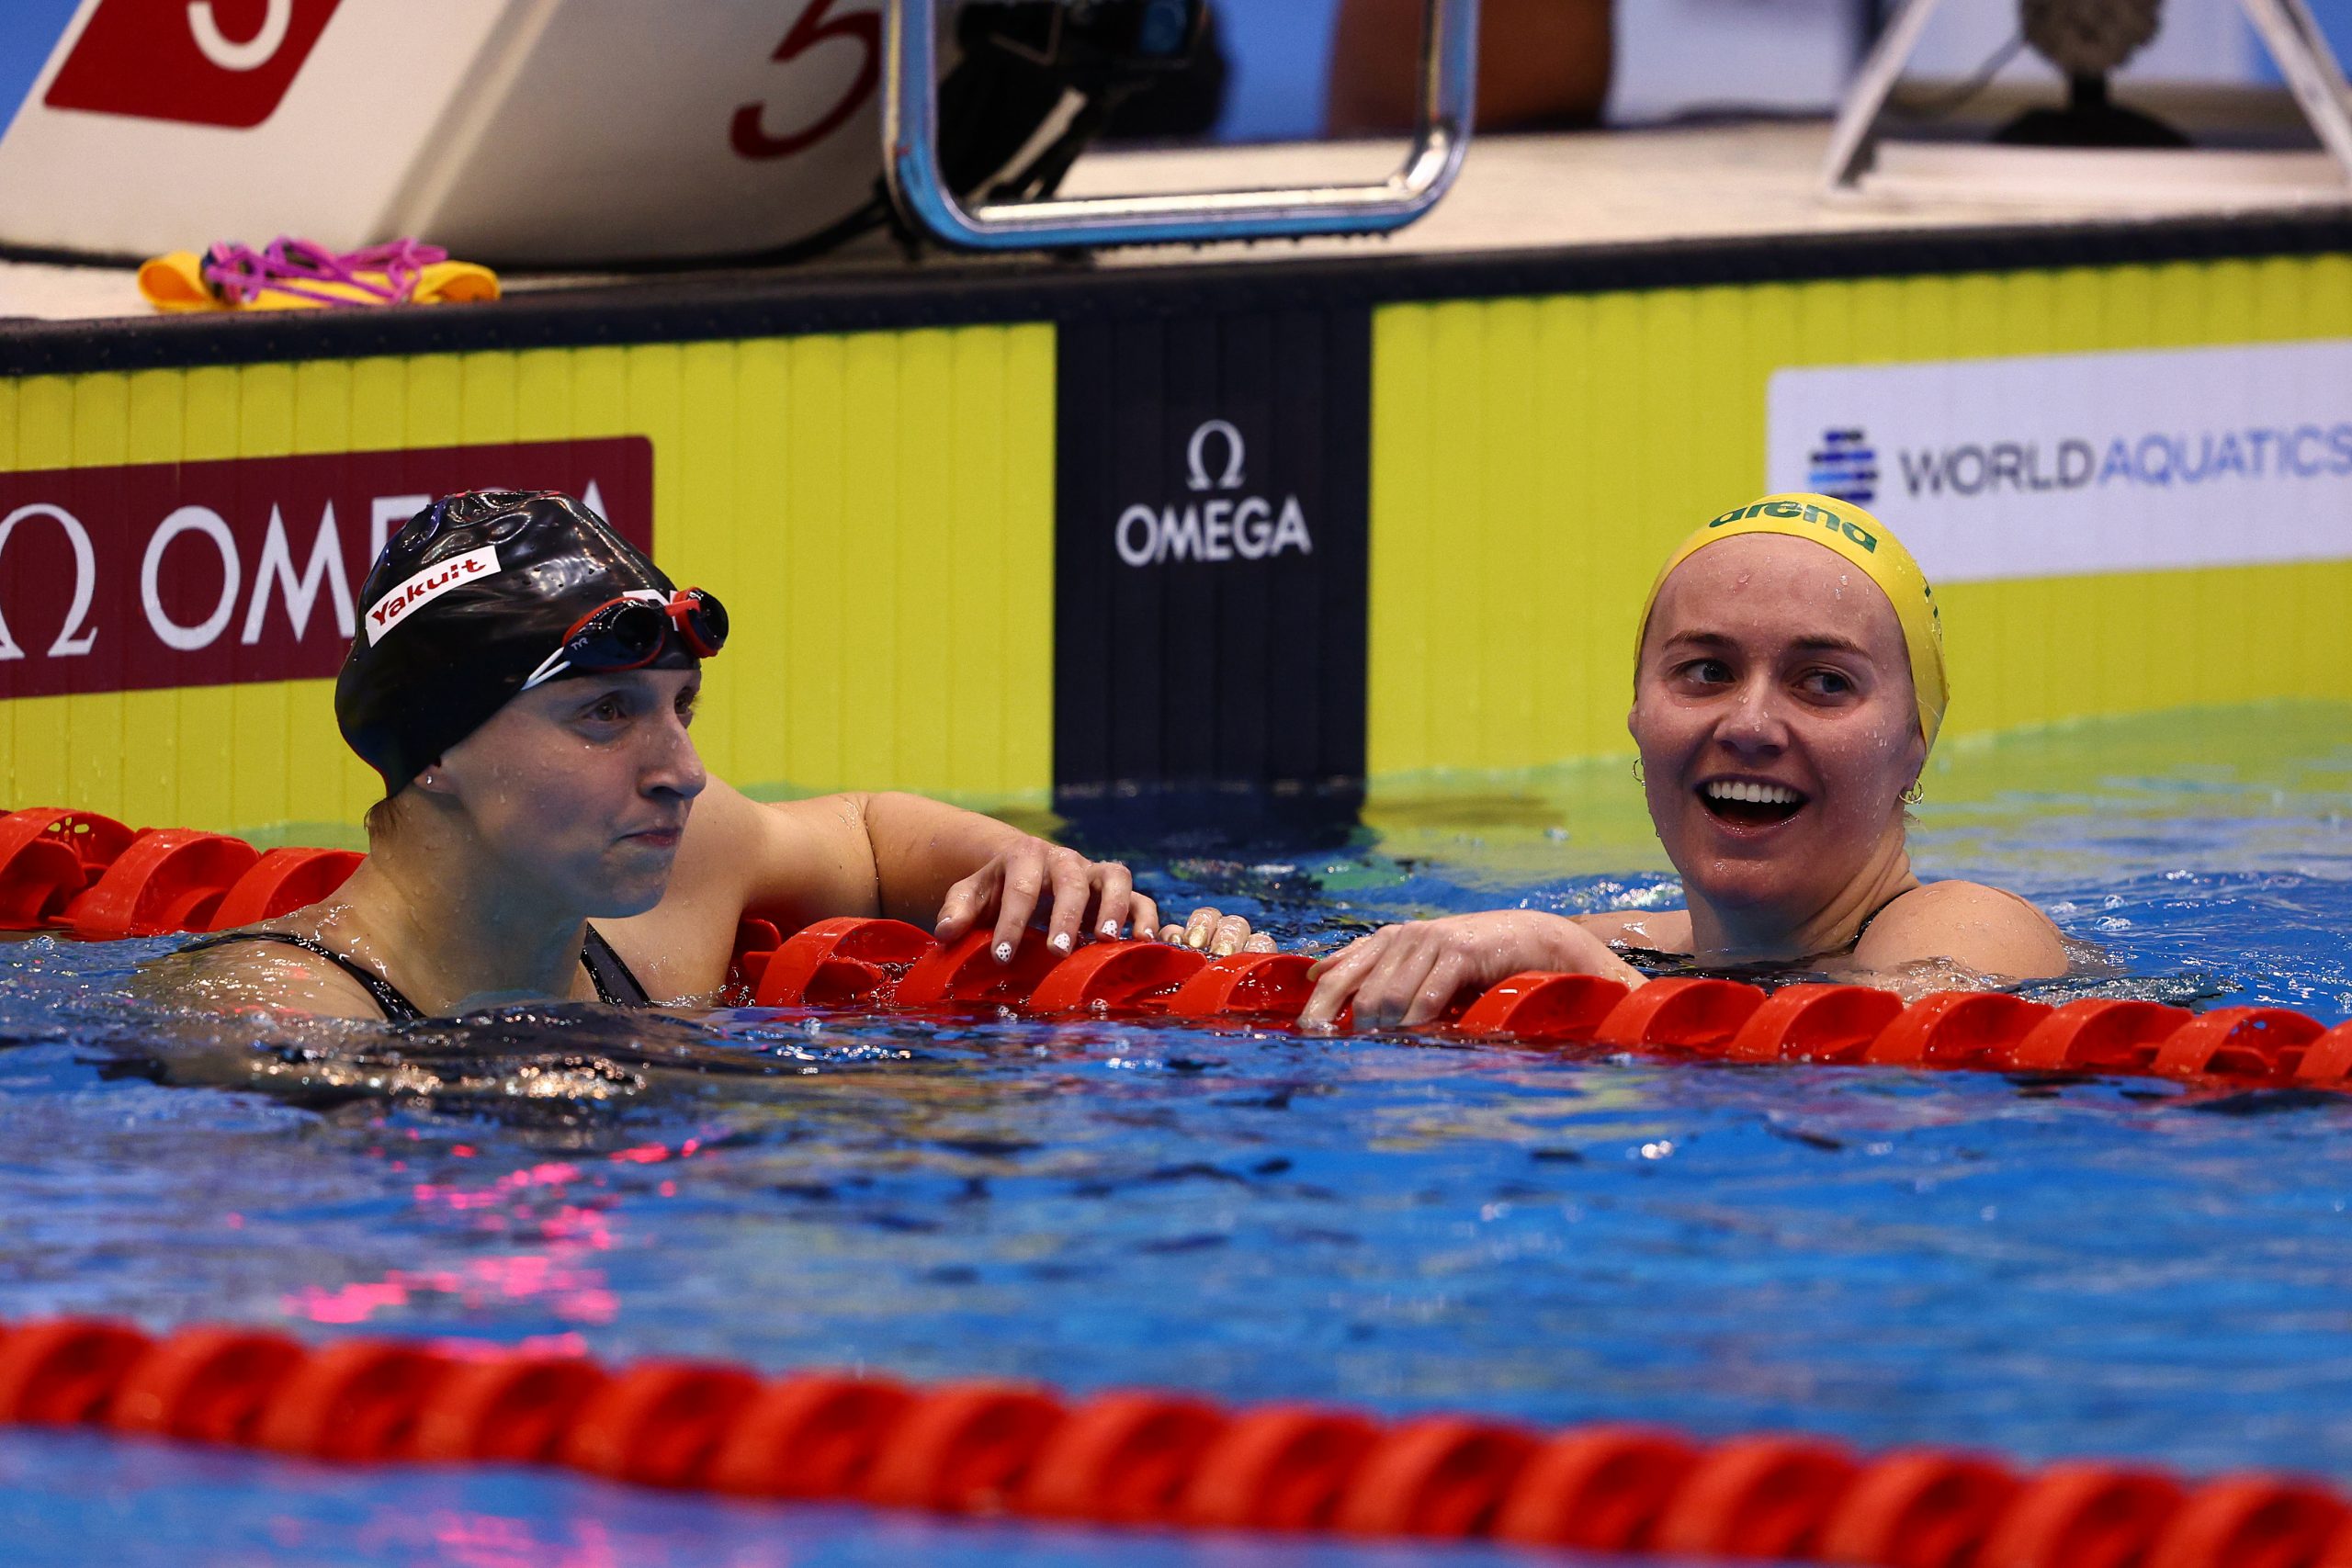 FUKUOKA, JAPAN - JULY 23:  Ariarne Titmus of Team Australia (R) reacts after winning gold in the Women's 400m Freestyle Final in a new world record time of WR 3:55.38 on day one of the Fukuoka 2023 World Aquatics Championships at Marine Messe Fukuoka Hall A on July 23, 2023 in Fukuoka, Japan. (Photo by Clive Rose/Getty Images)